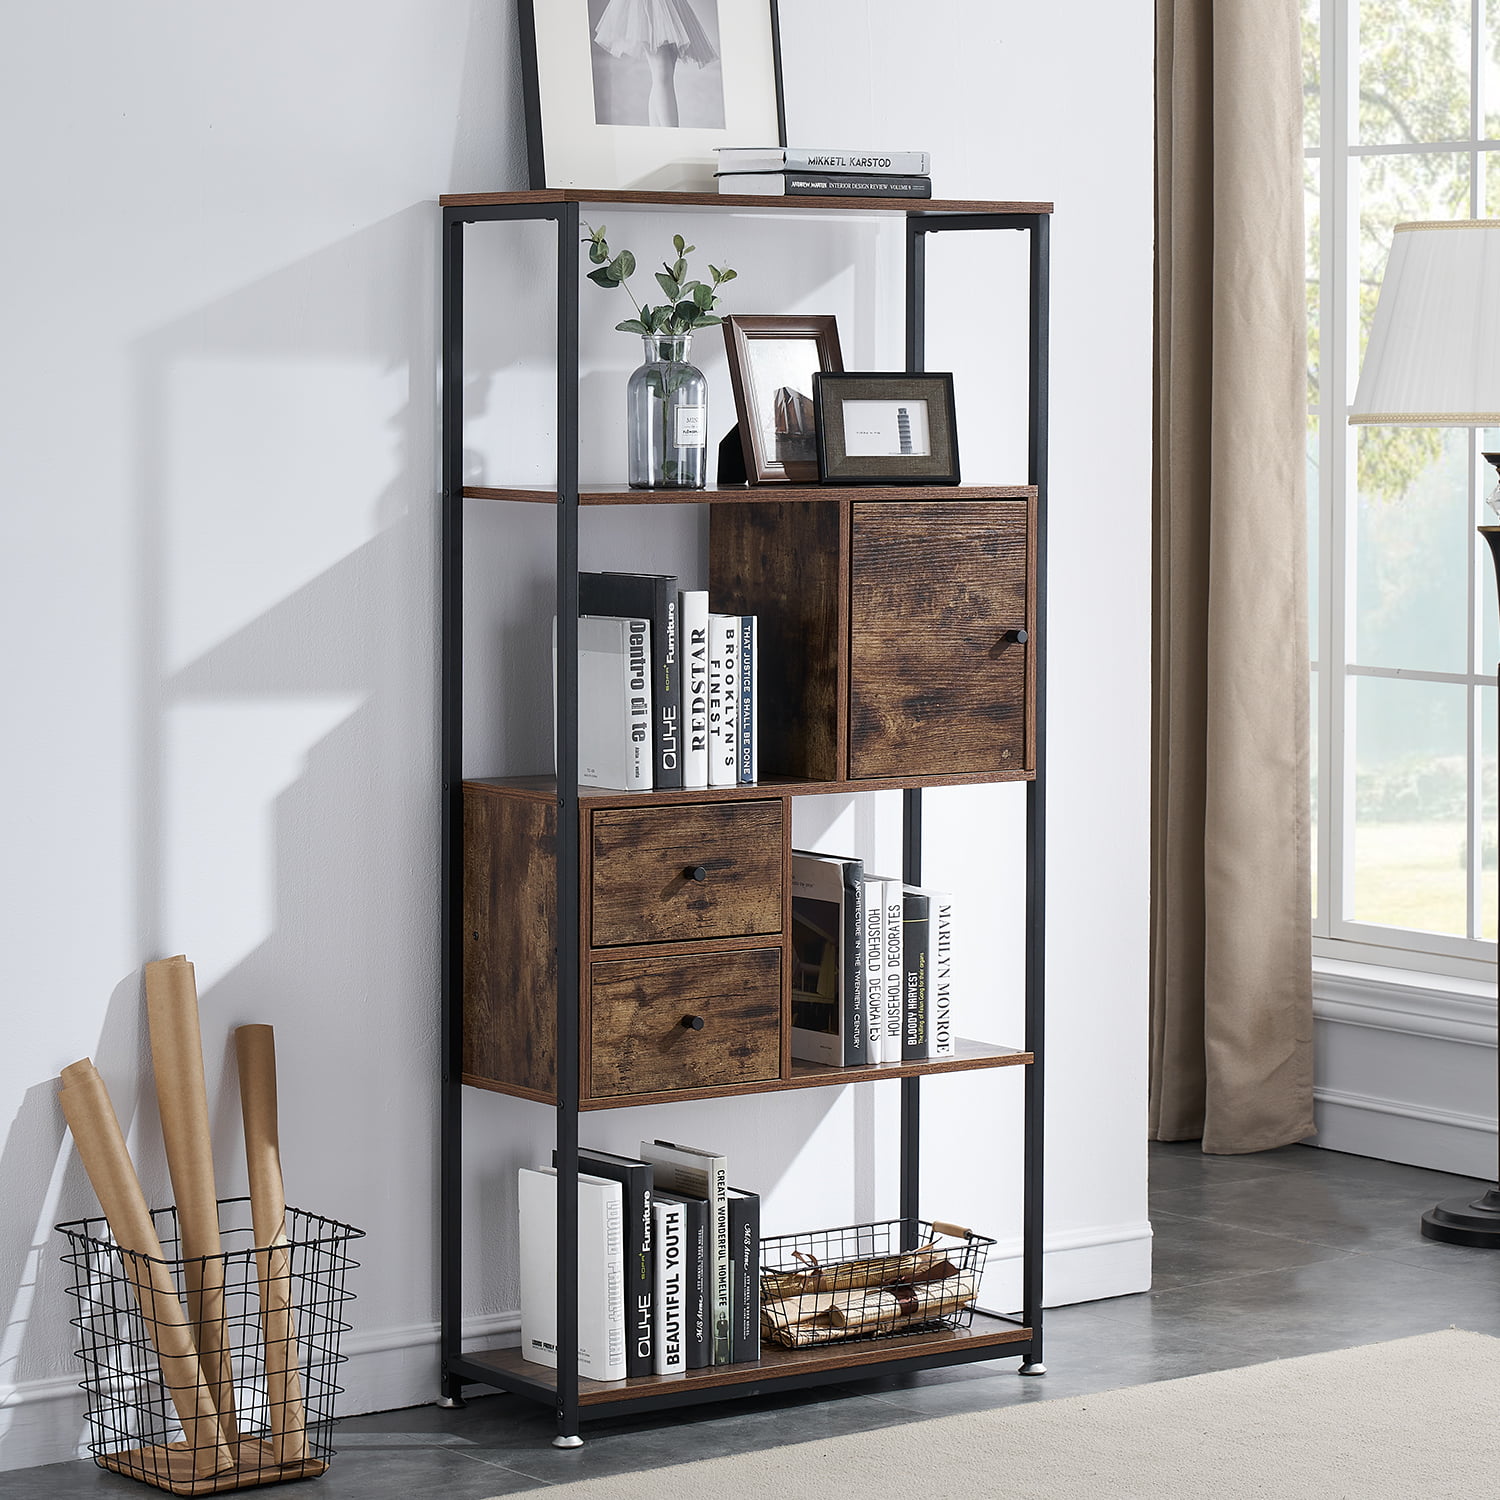 Lavievert 4-Tier Vintage Industrial Bookshelf Rustic Wood and Metal Bookcase Standing Display Rack and Storage Organizer for Home & Office